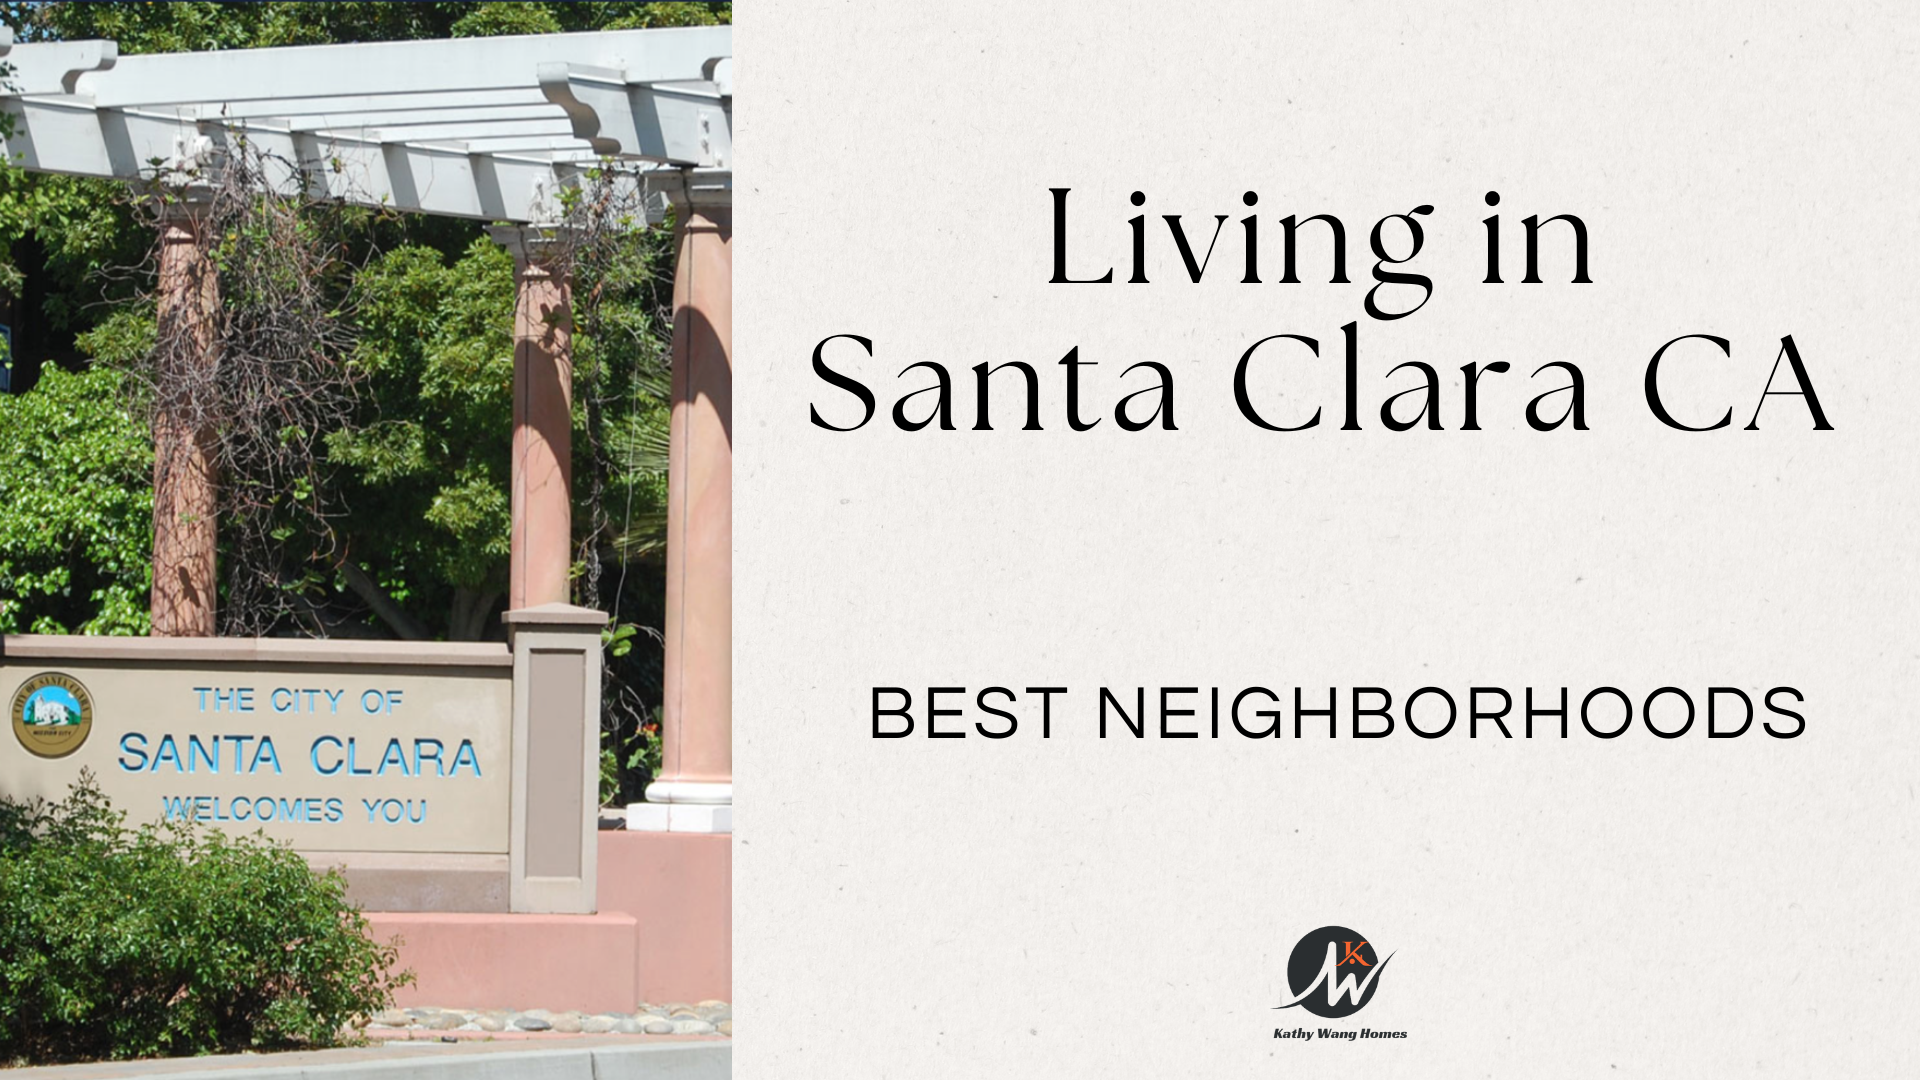 Is City of Santa Clara, CA a good place to live?